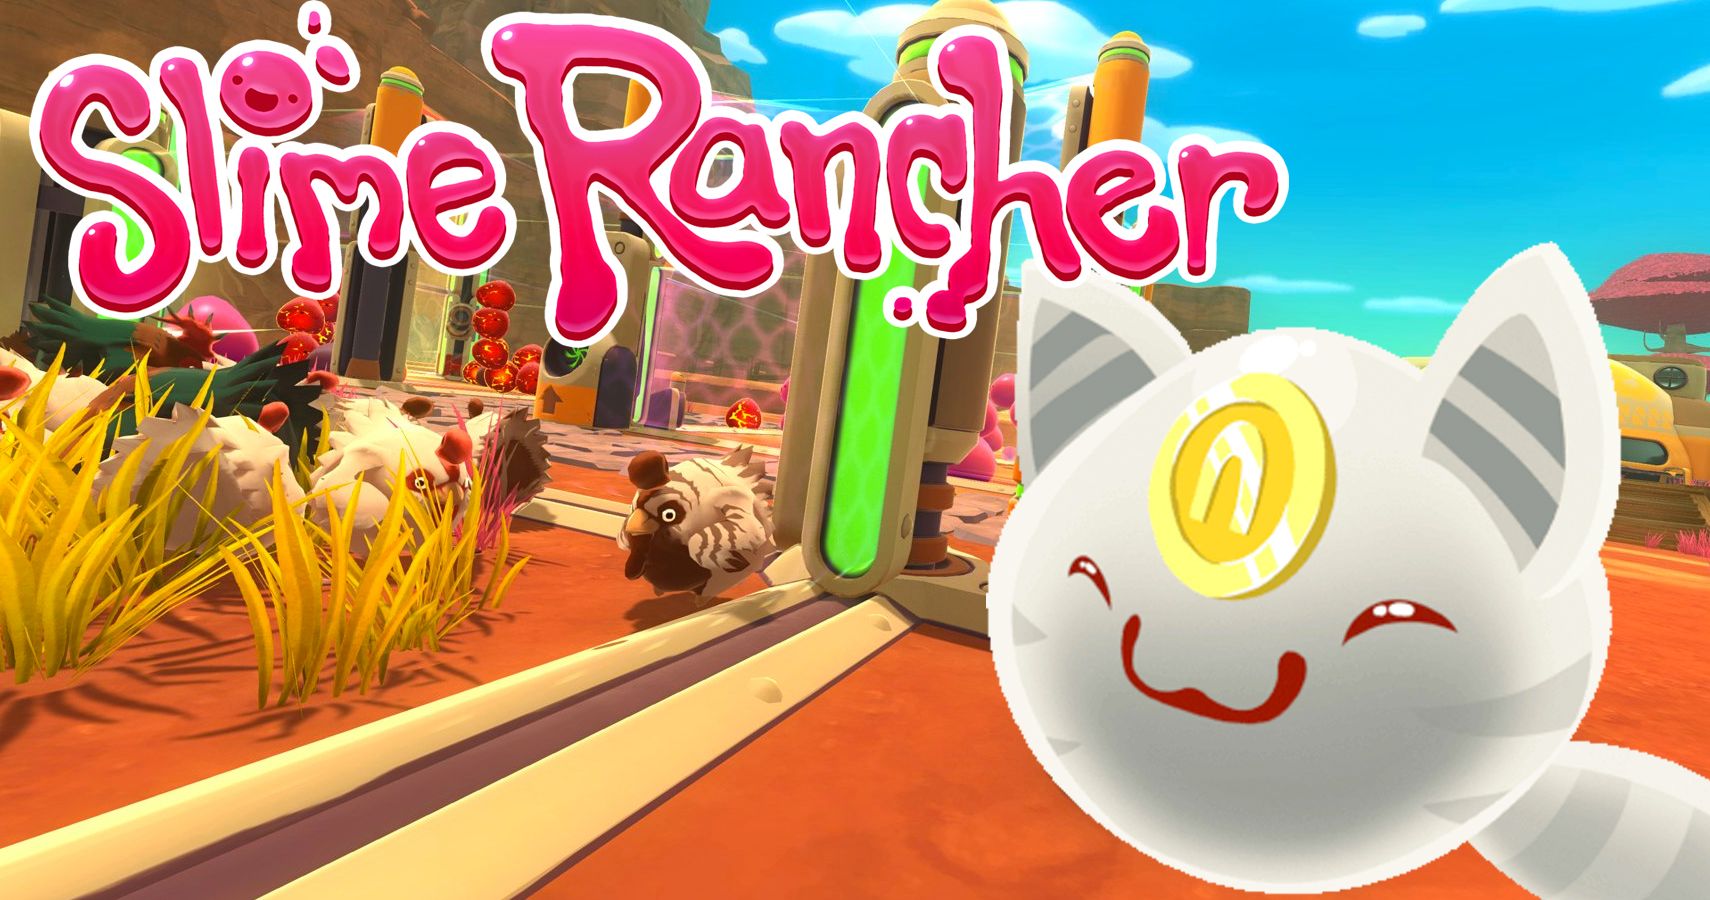 Pin by Tristan on Slime rancher | Slime rancher, Pokemon breeds, Slime